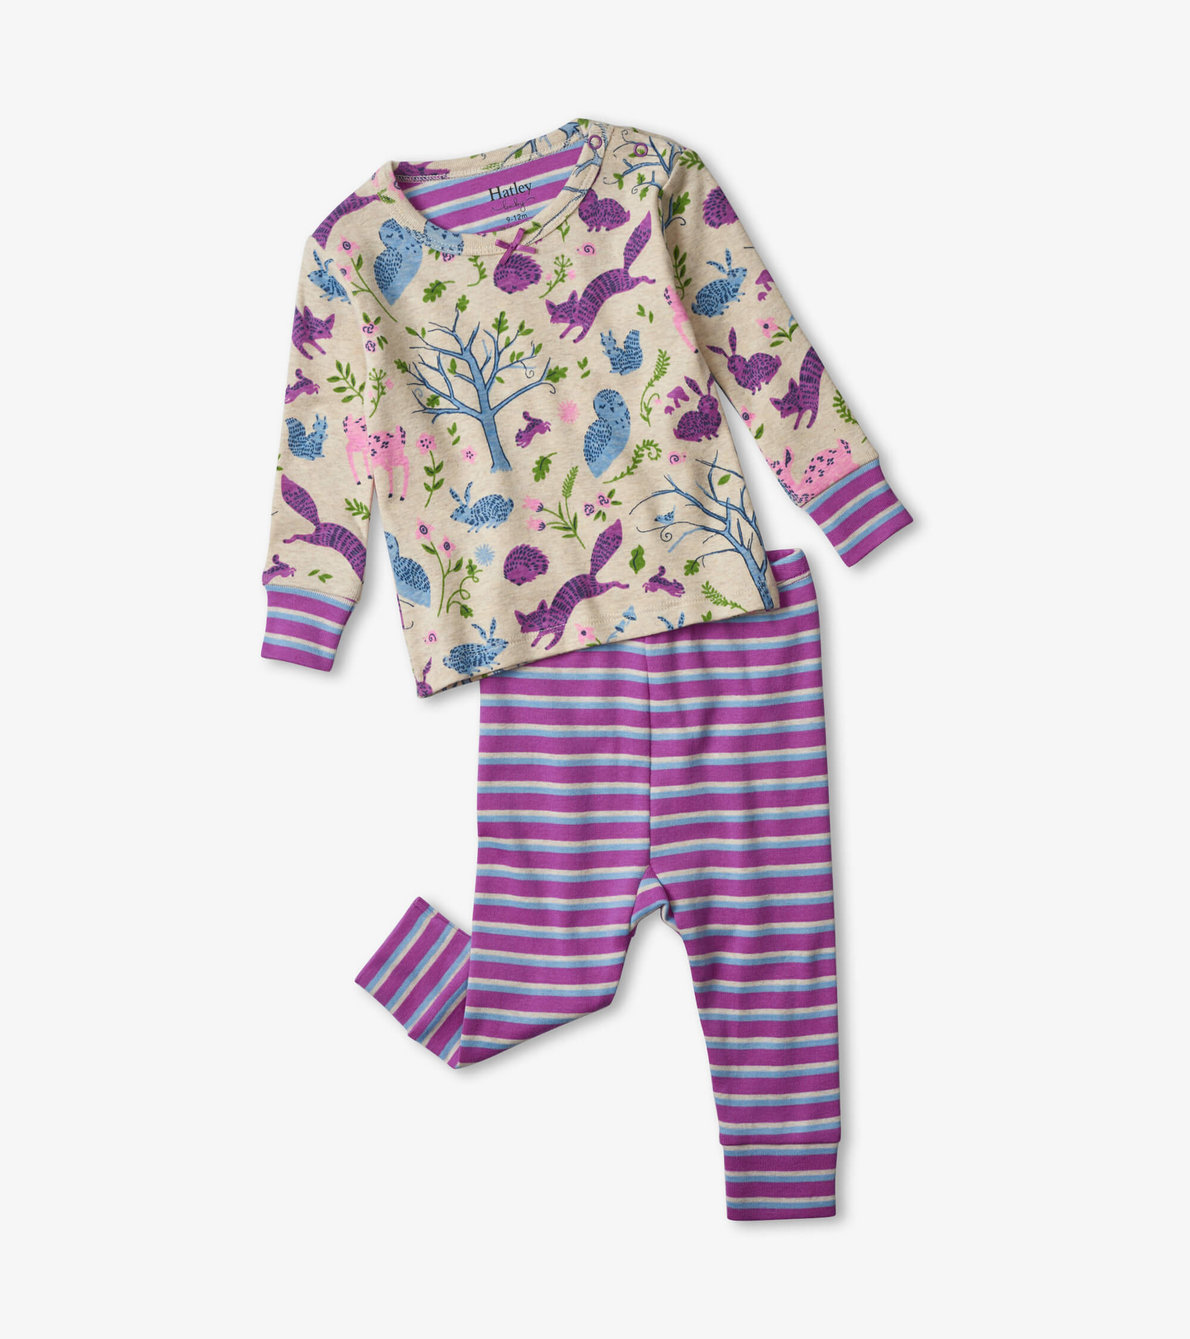 View larger image of Magical Forest Organic Cotton Baby Pajama Set